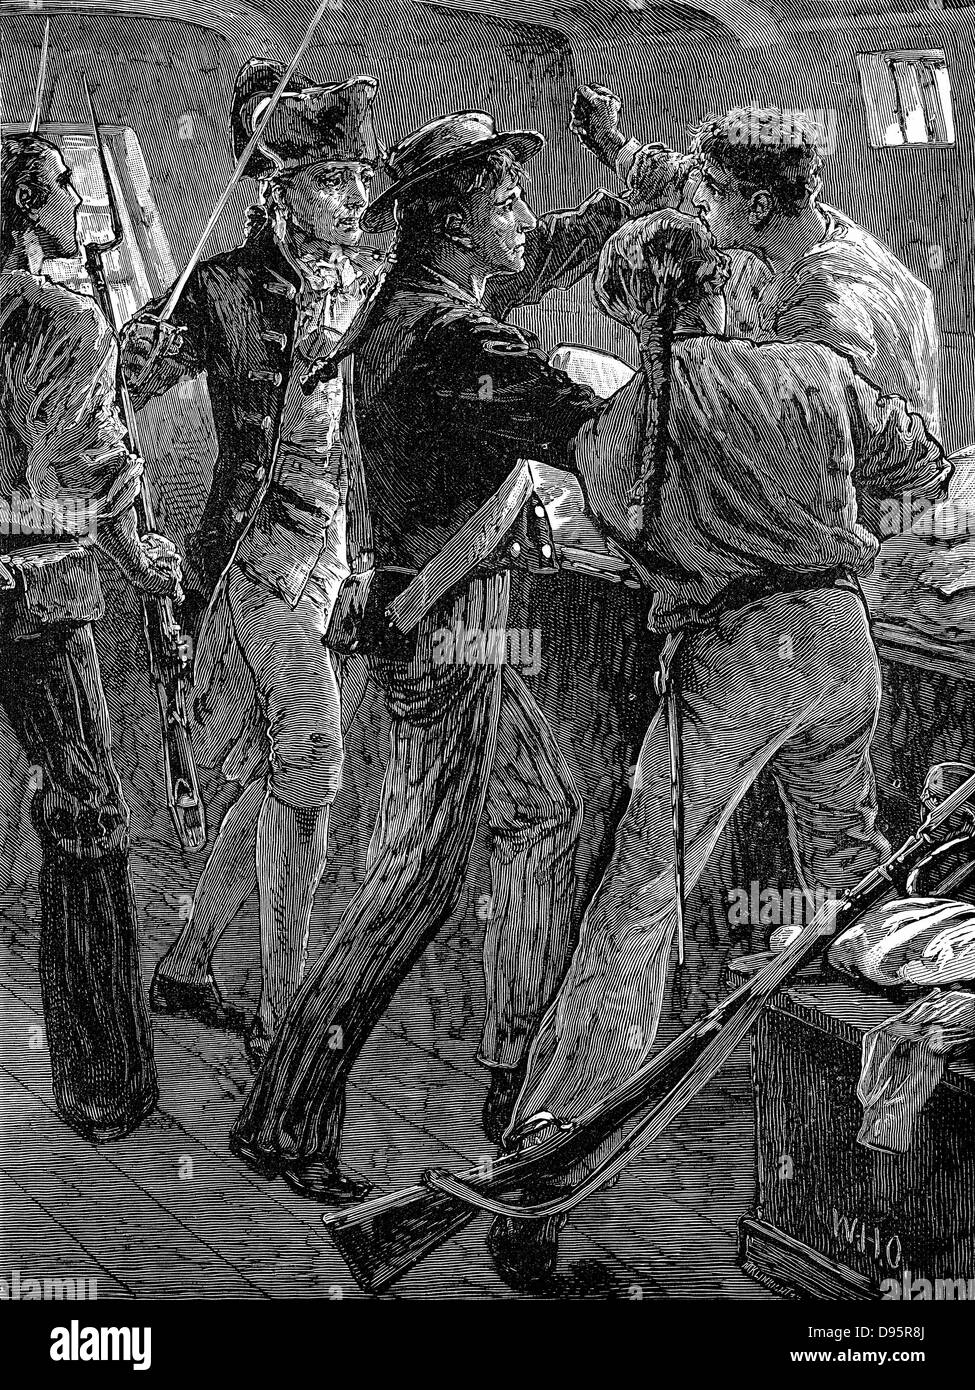 William Bligh (1754-1817) British naval officer, seized in his cabin by mutinous crew of 'HMS Bounty', led by Fletcher Christian (with sword) 28 April 1789. Late 19th century engraving. Stock Photo